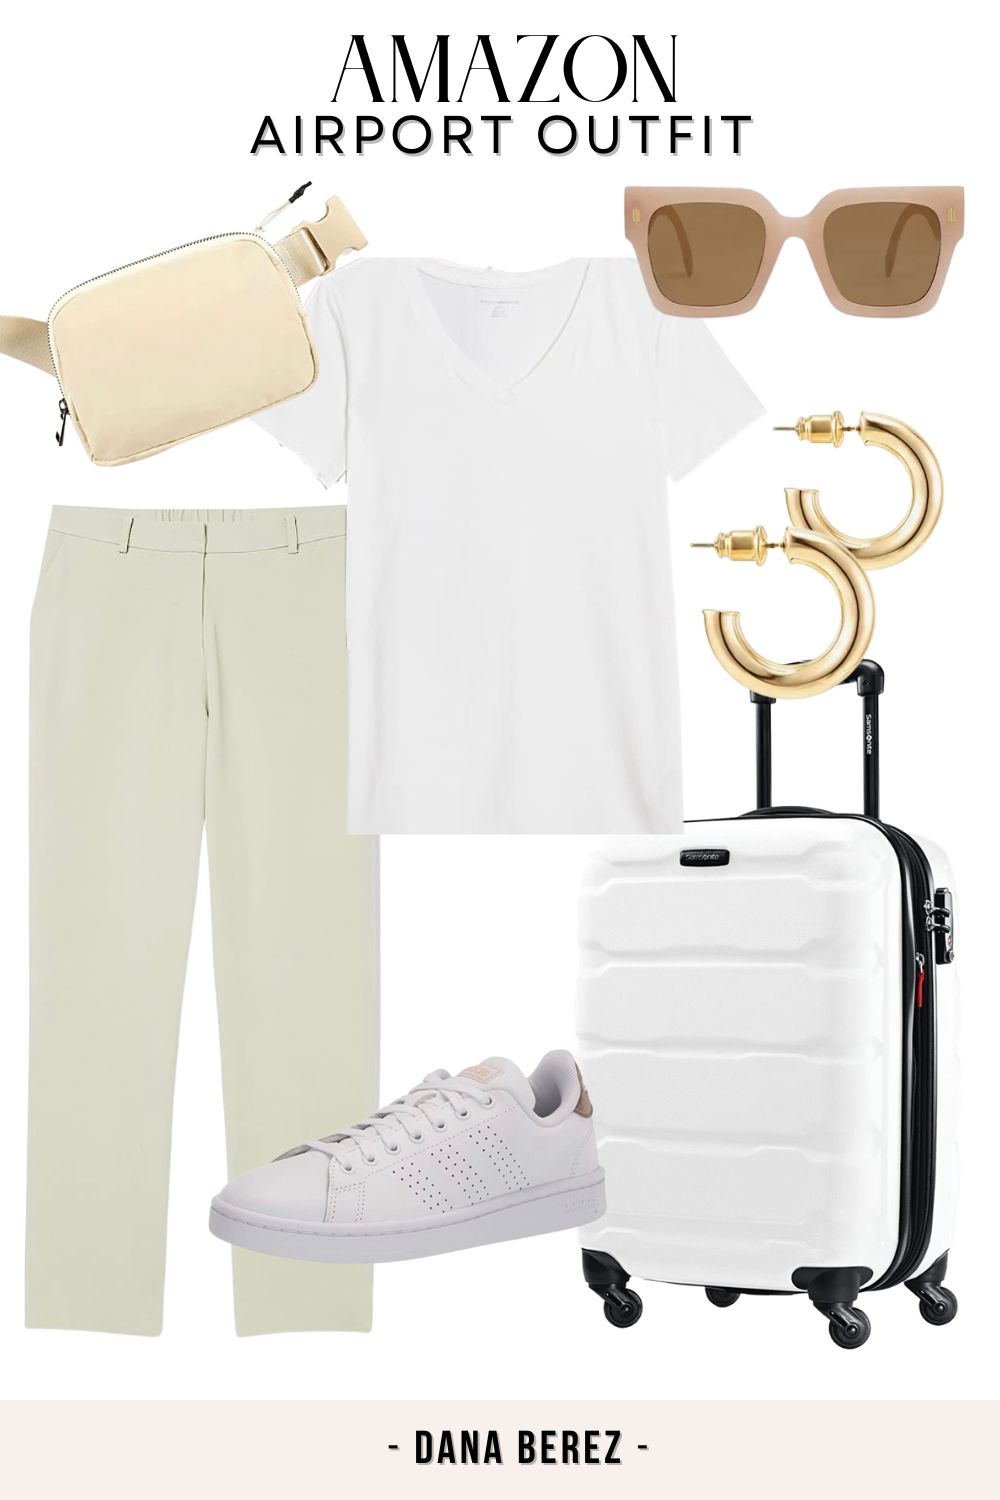 Amazon Airport Outfit